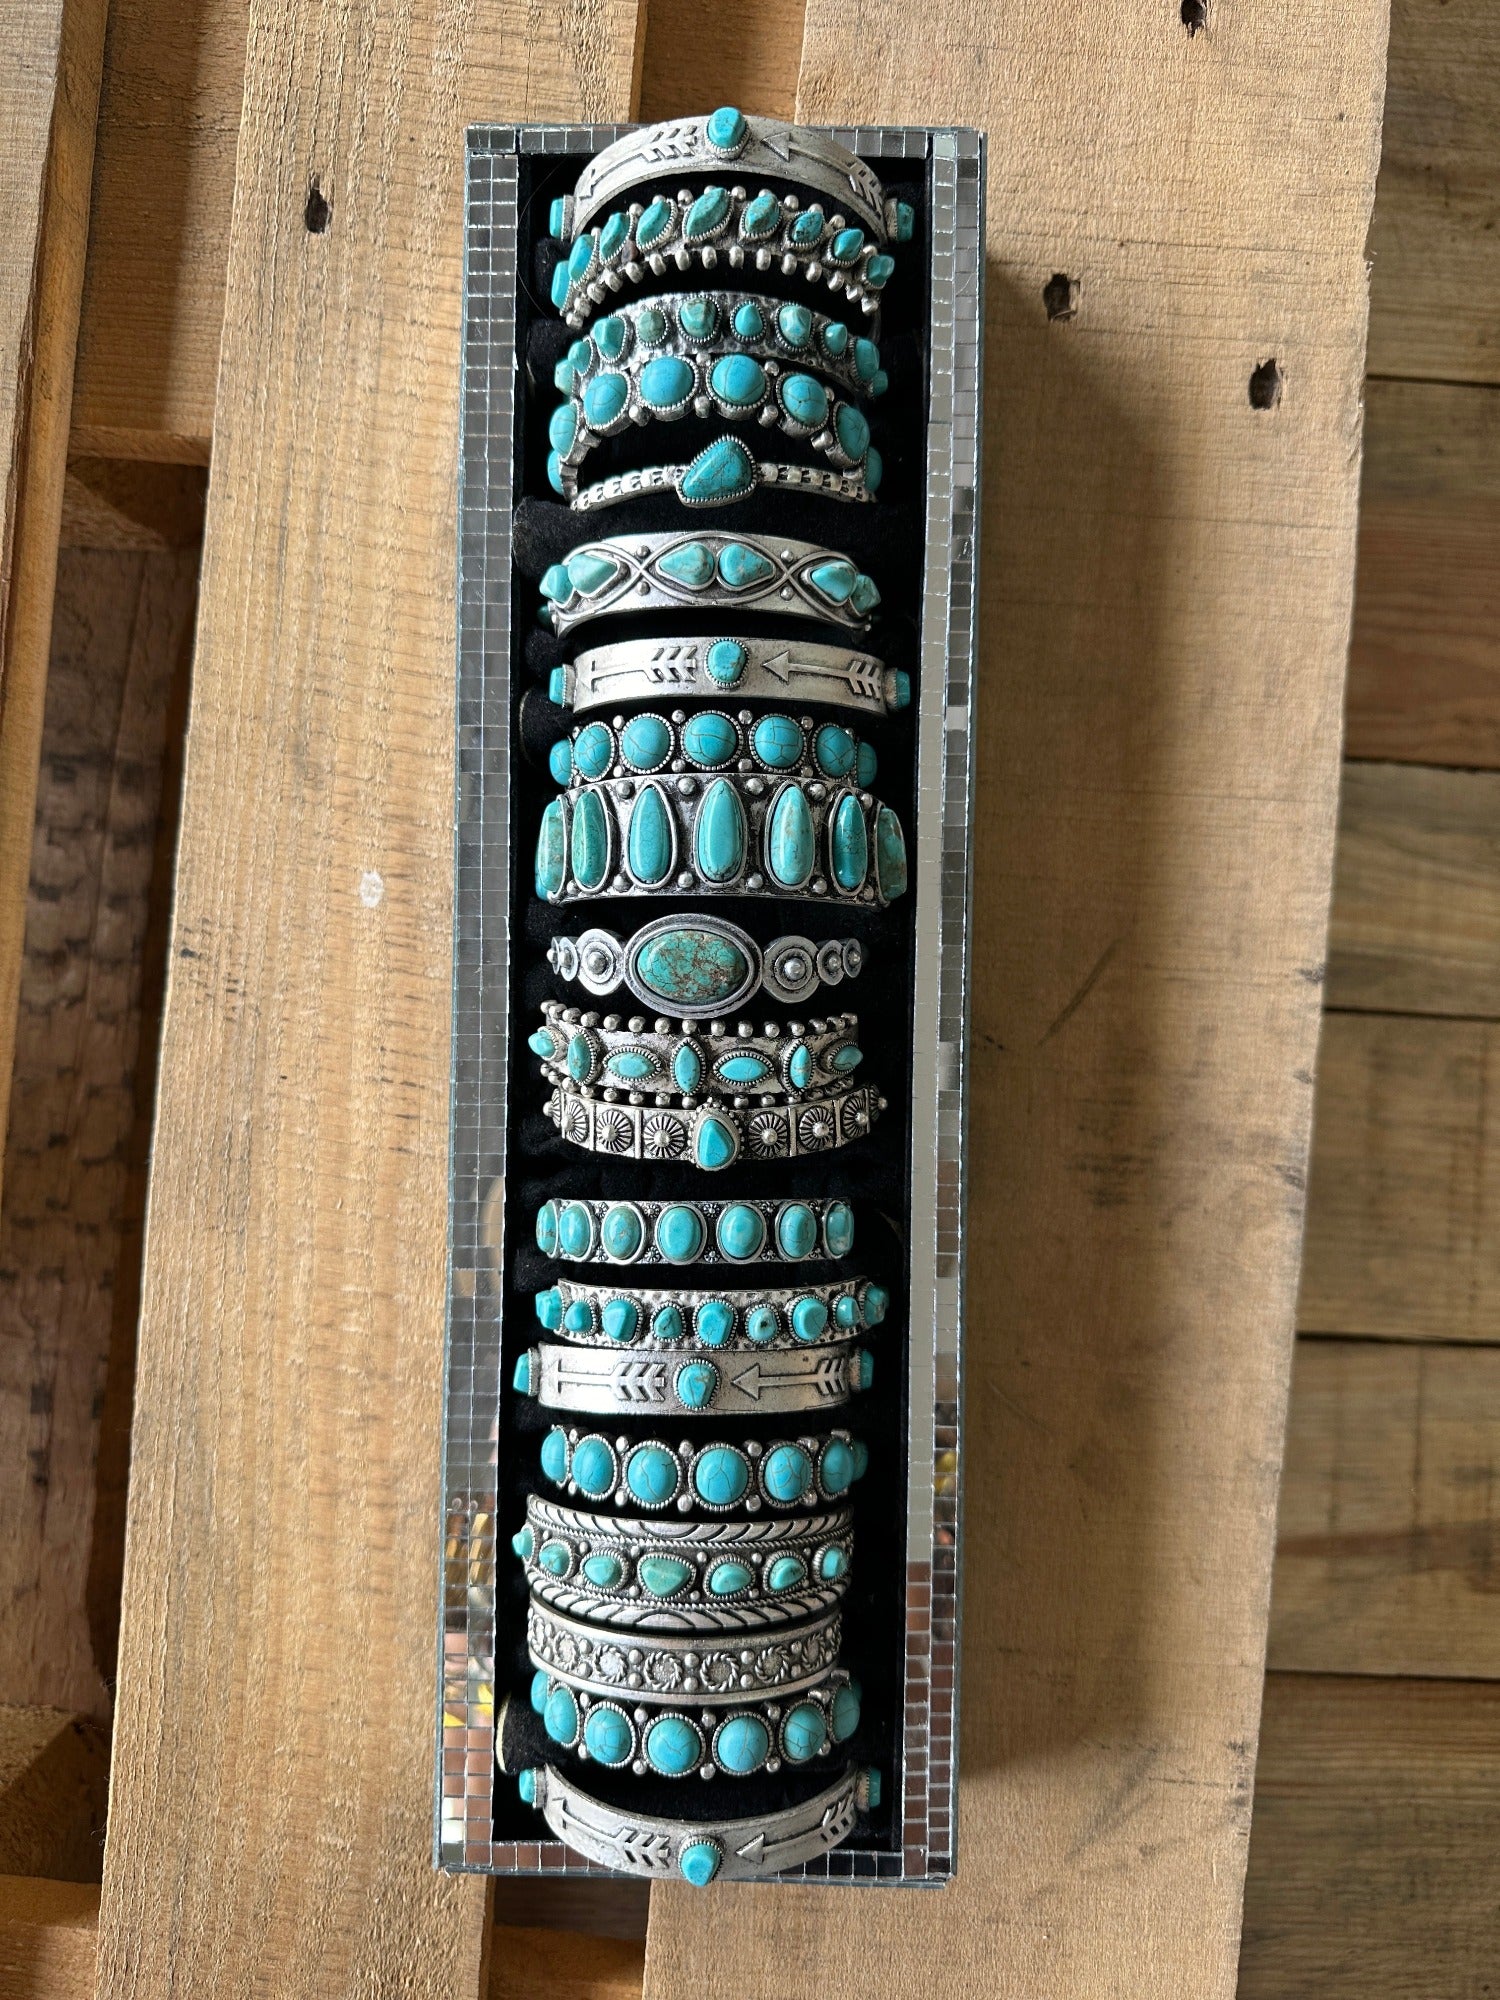 Stacker Queen Turquoise Stone Etched Silver Stacking Cuff Bracelets